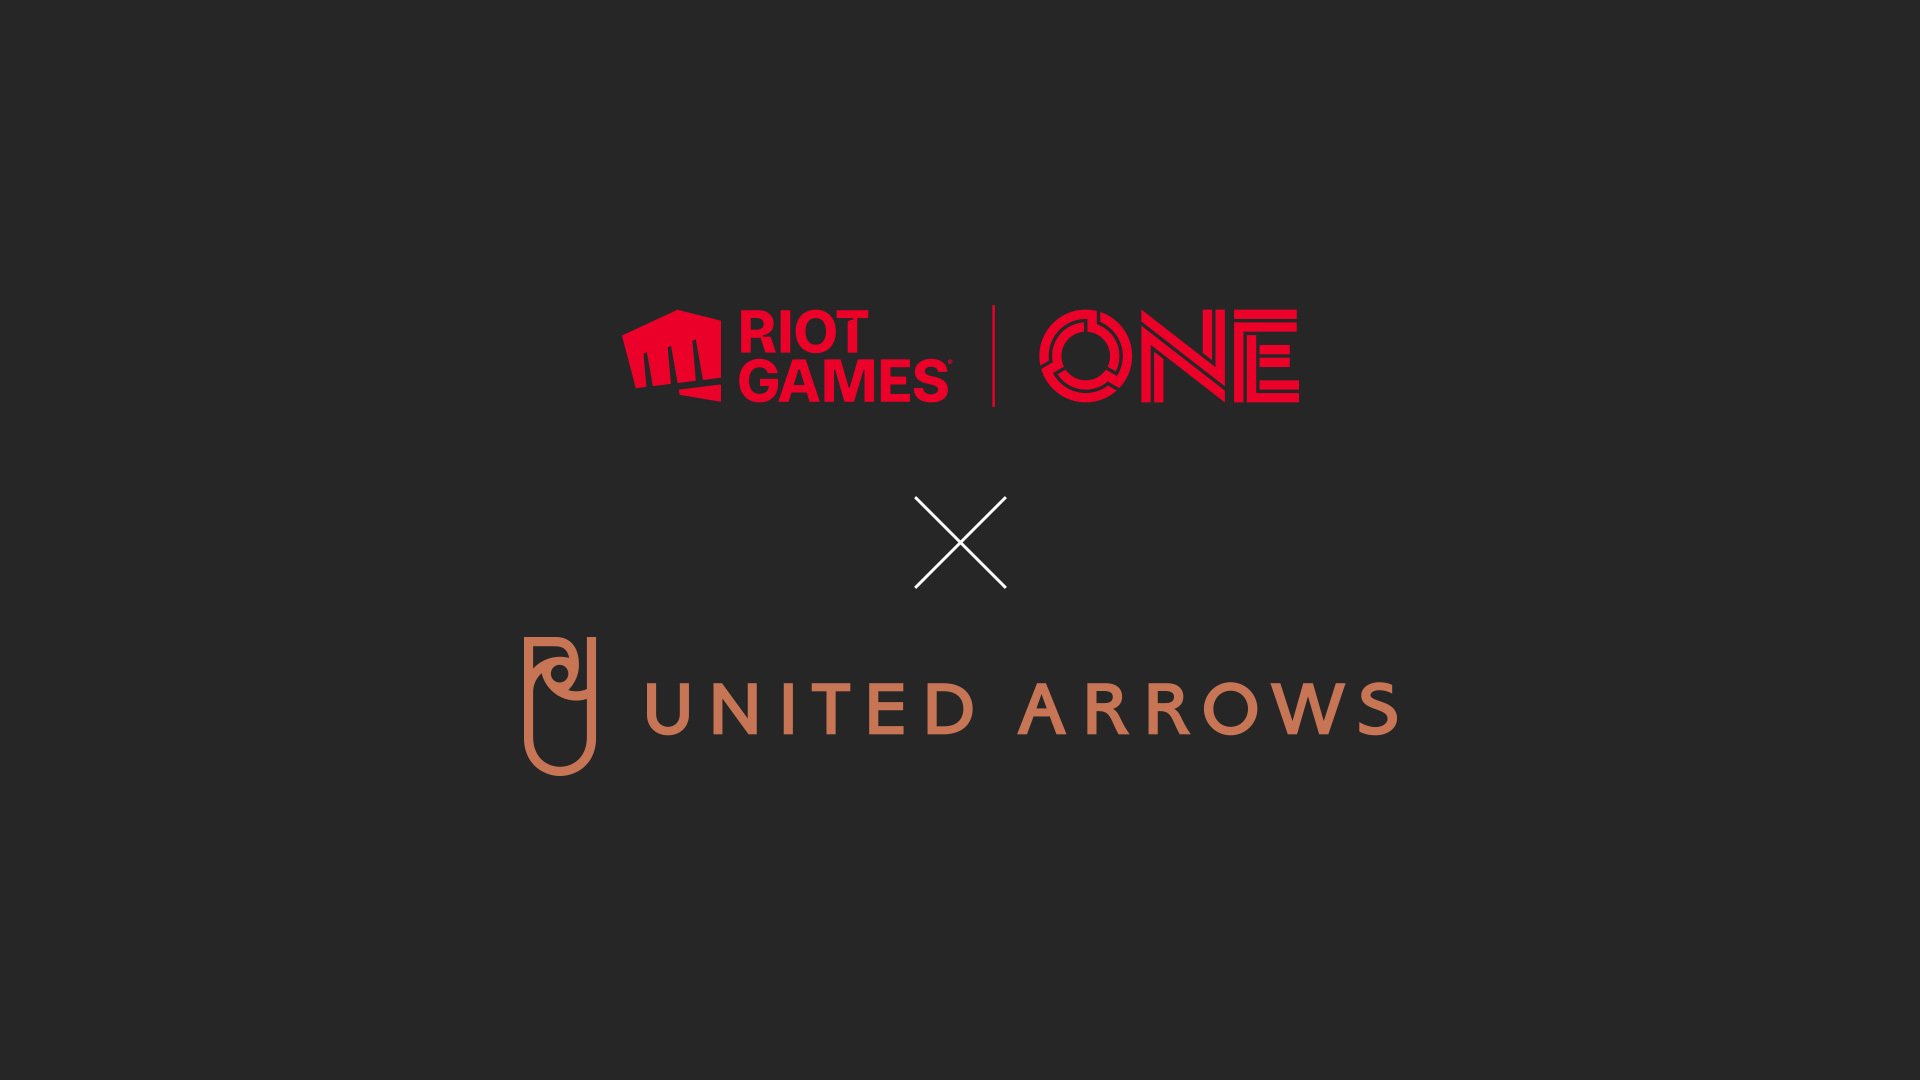 Riot Games ONE x UNITED ARROWS